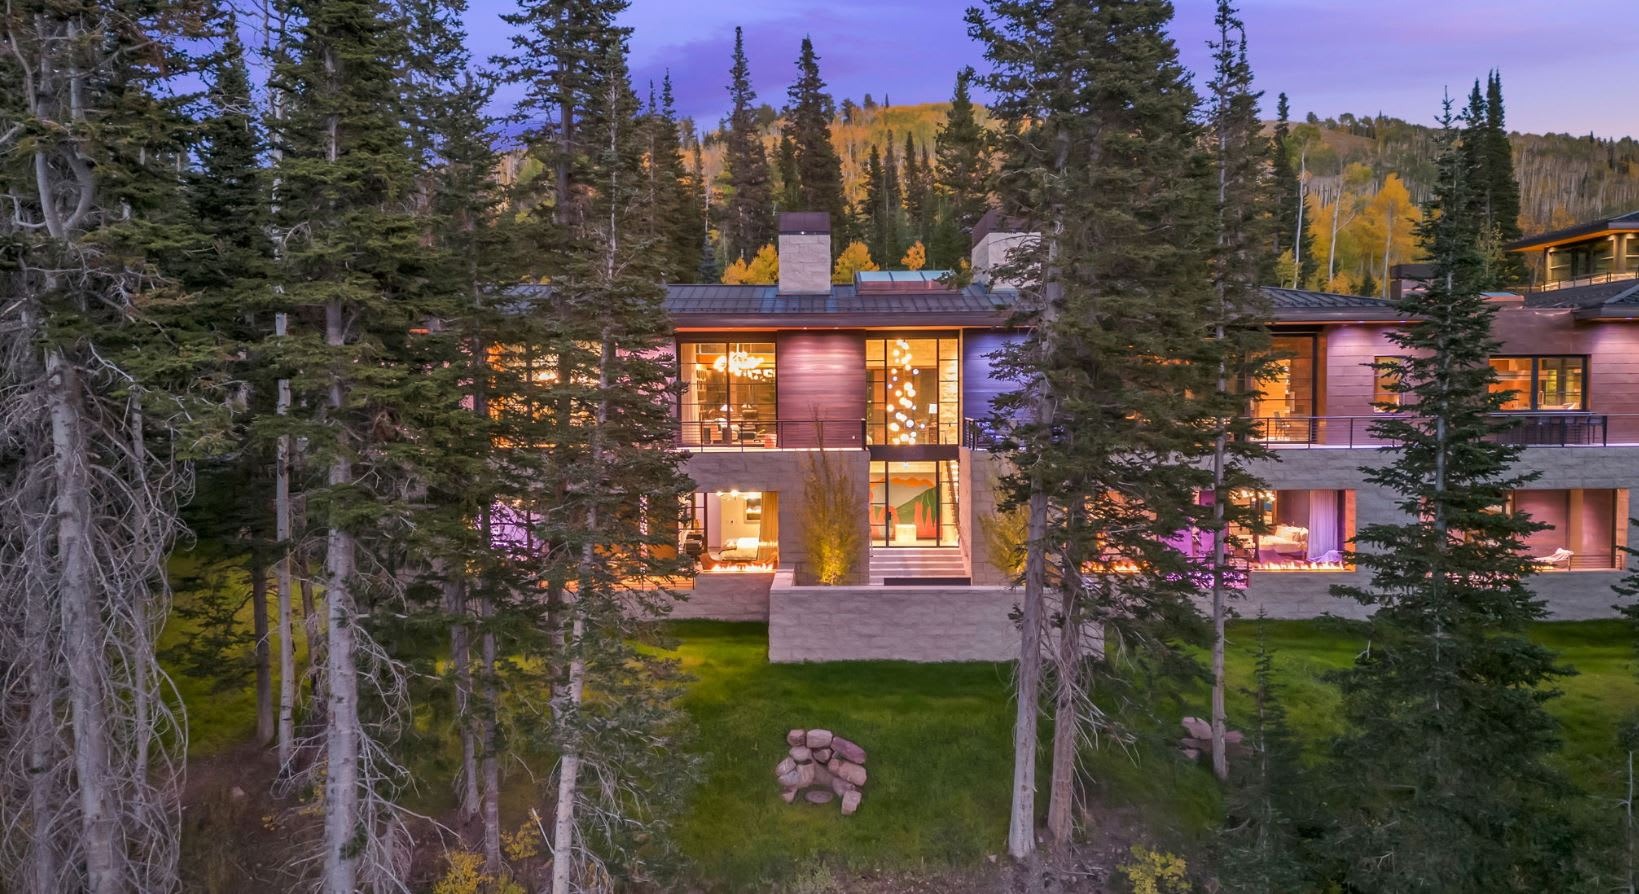 INSIDE THE MOST EXPENSIVE HOME IN PARK CITY - $50,000,000